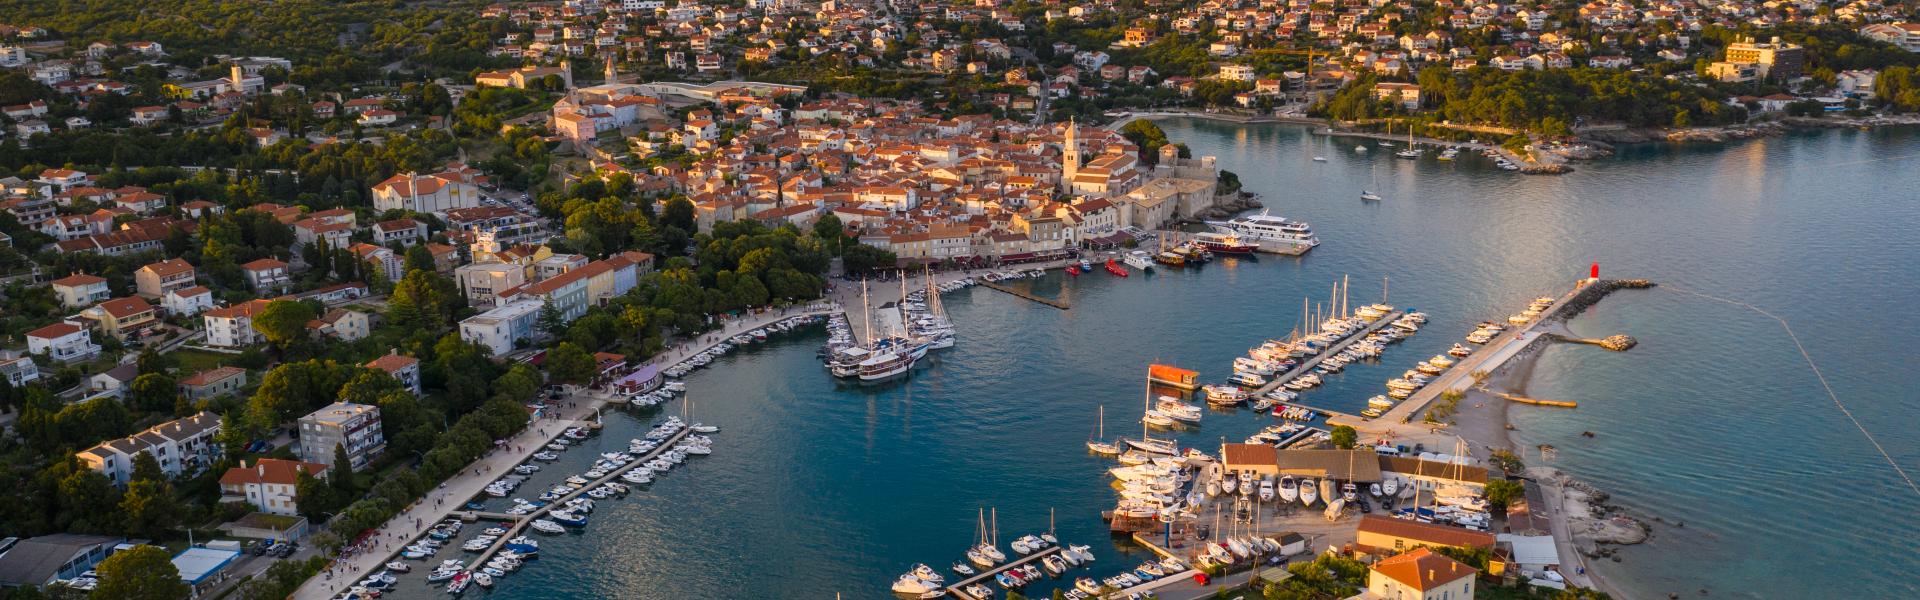 Sunset over the medieval Krk old town and harbor in the Krk island in Croatia